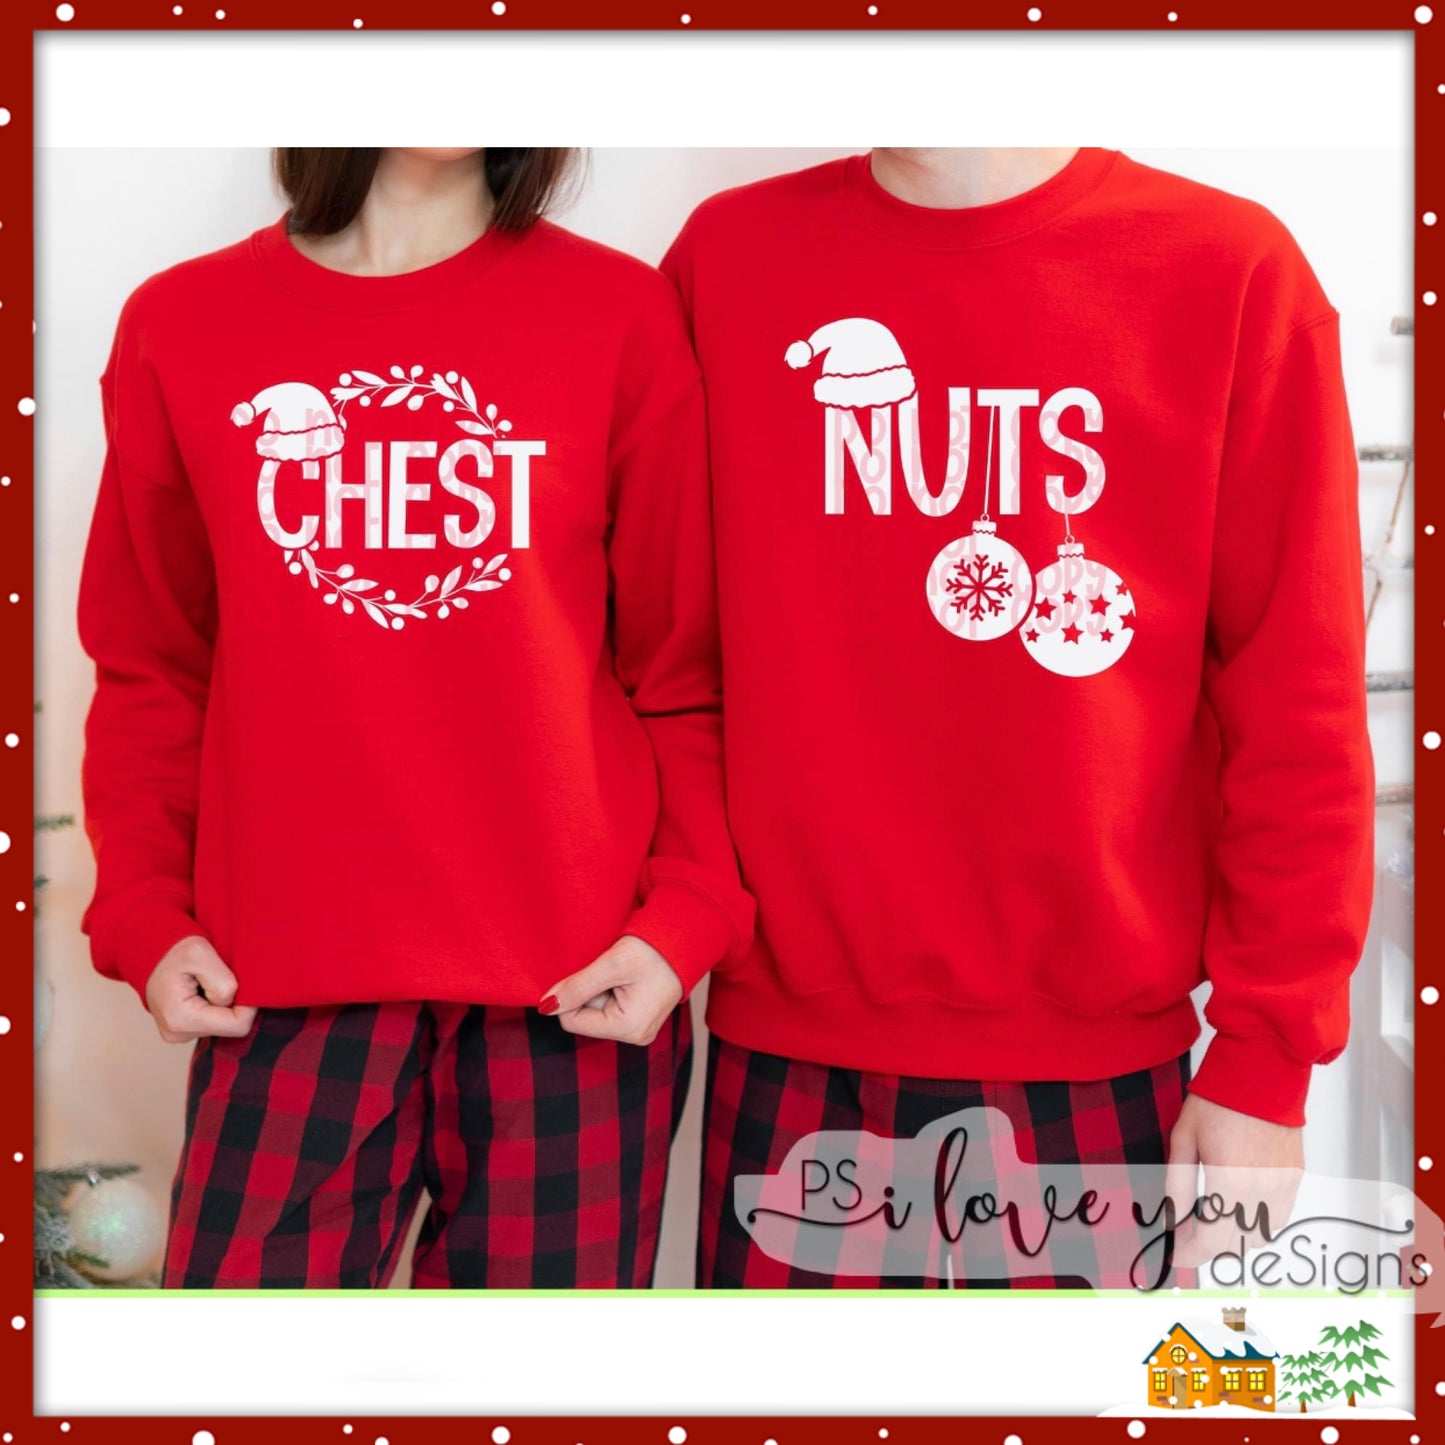 Chest and Nuts Christmas Hoodies